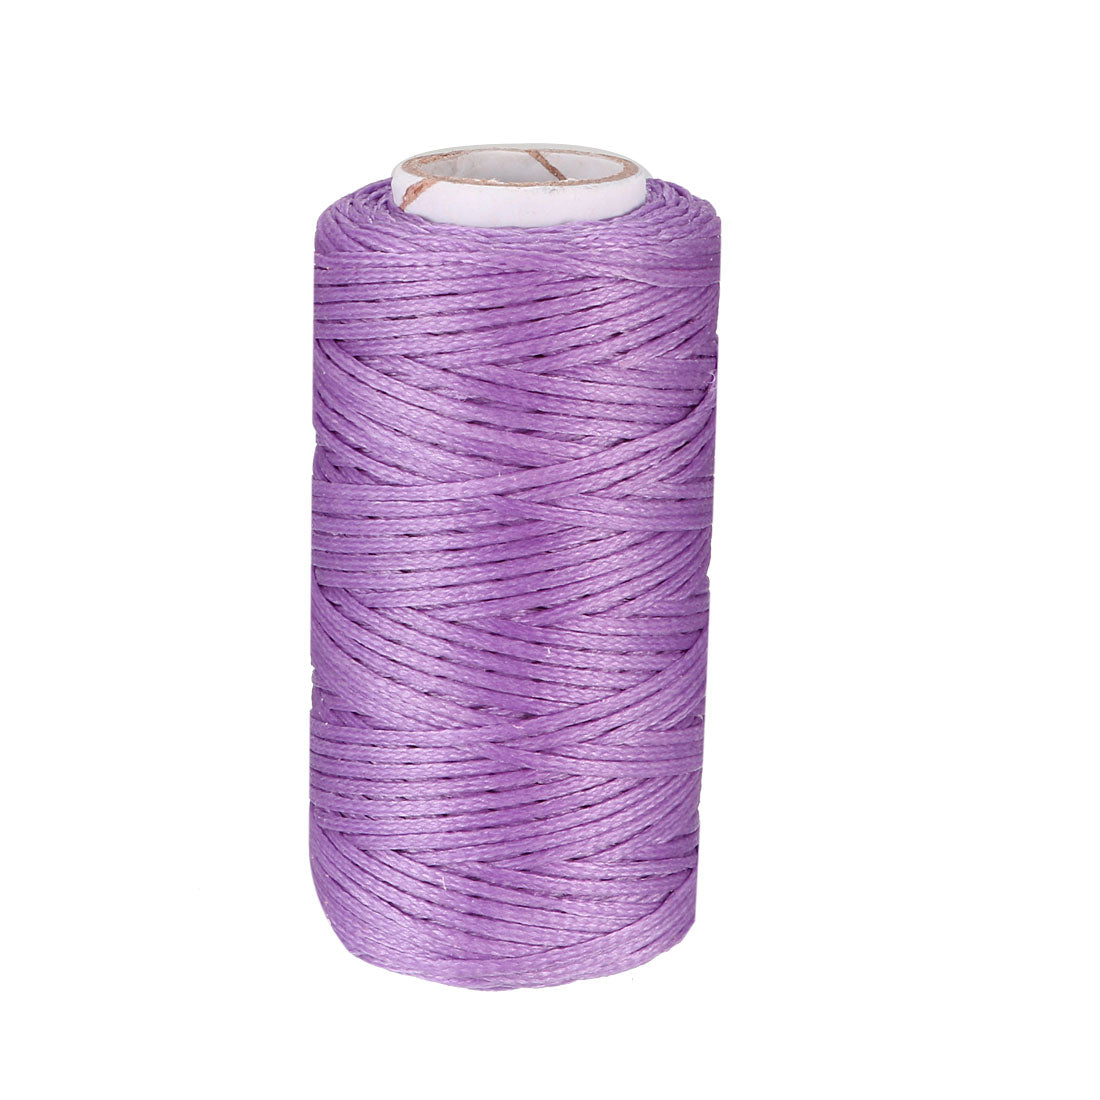 Uxcell Uxcell Crafts 150D 1mm Leather Sewing Stitching Flat Waxed Thread String Cord (150D 1mm 50M, Fuchsia )